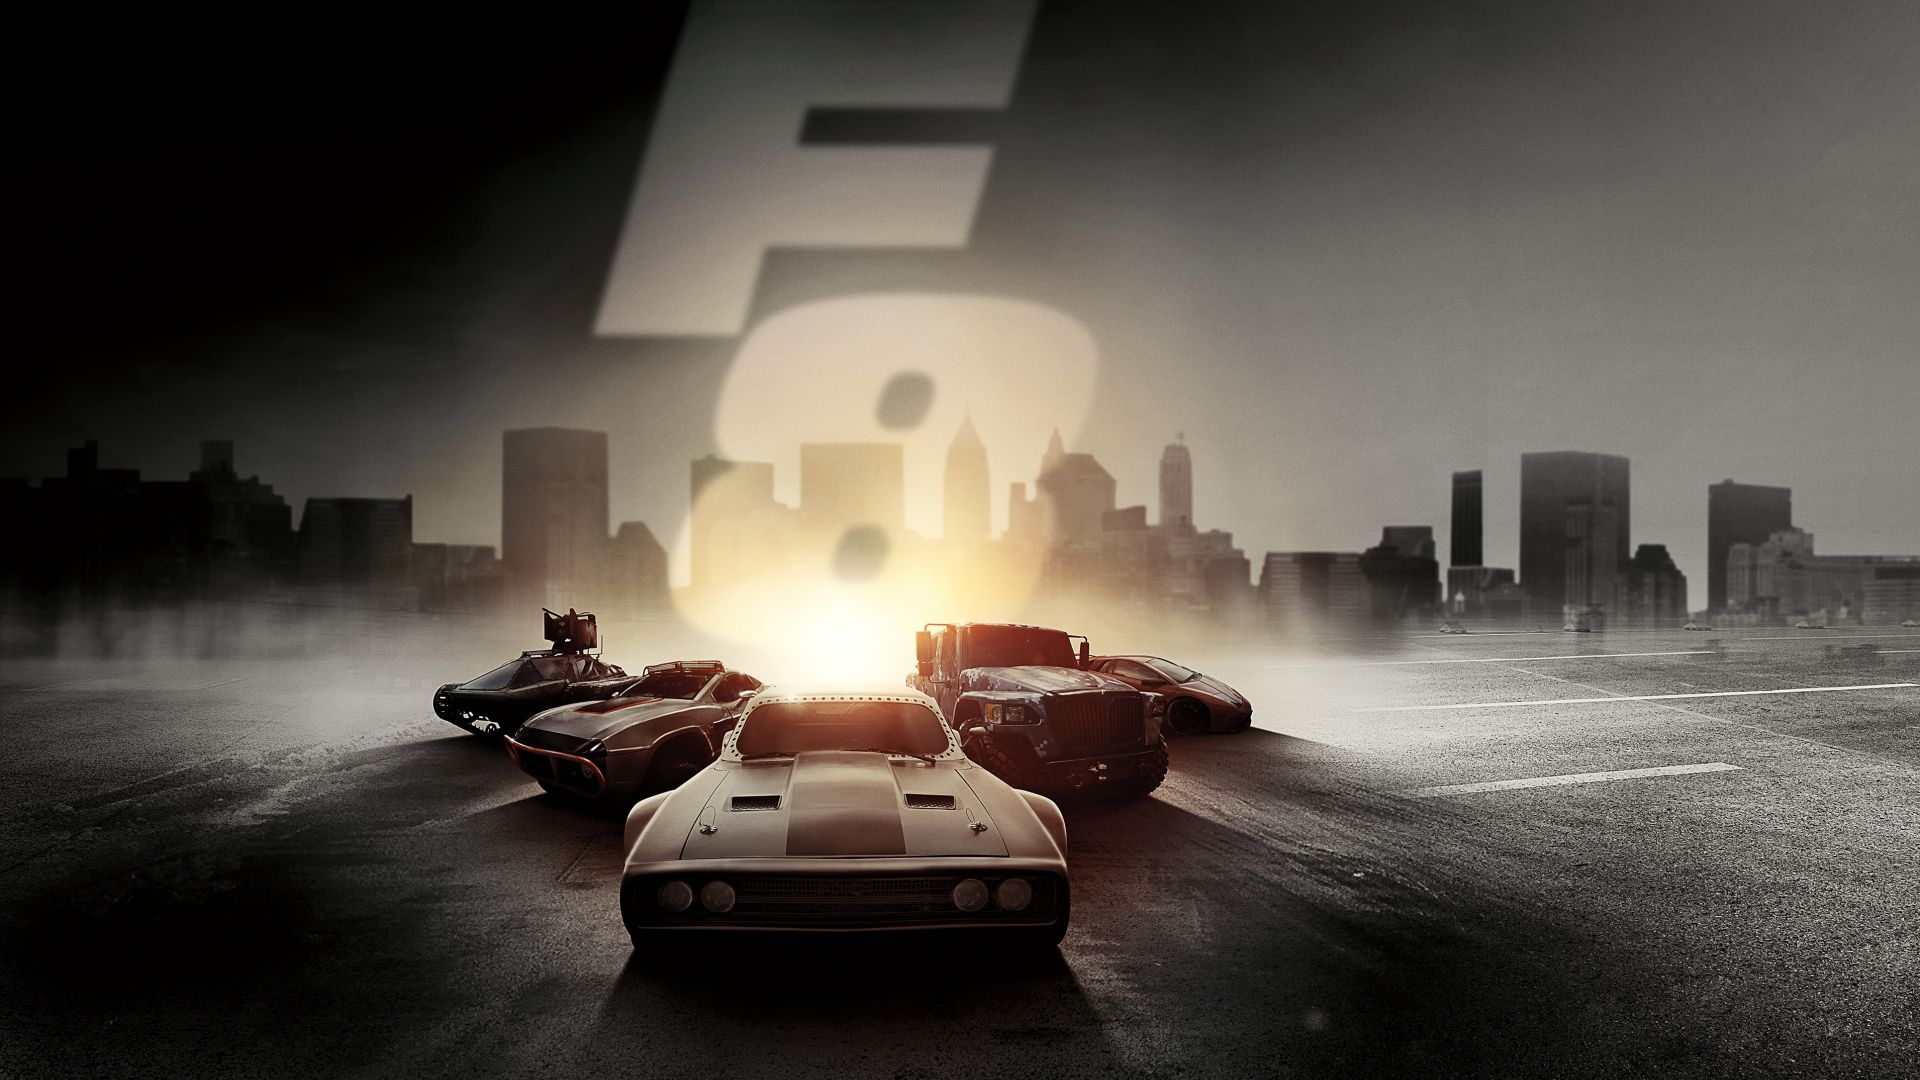 Wallpaper The Fate of the Furious, movie, series 8, 2017 movie, 4k